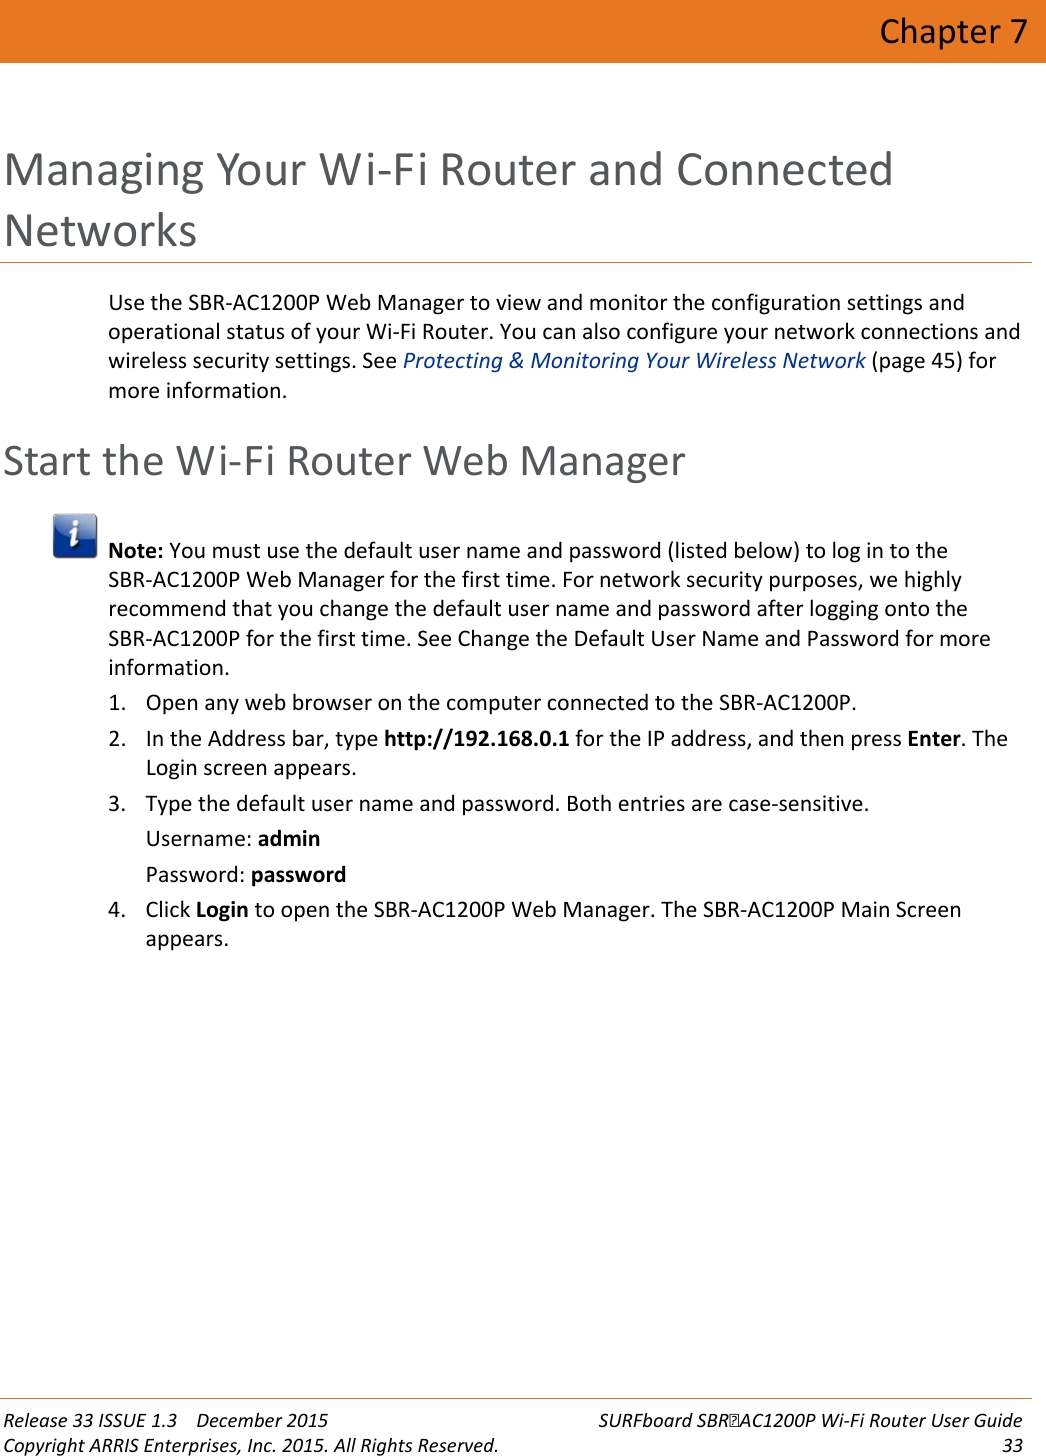  Release 33 ISSUE 1.3    December 2015 SURFboard SBRAC1200P Wi-Fi Router User Guide Copyright ARRIS Enterprises, Inc. 2015. All Rights Reserved. 33  Chapter 7 Managing Your Wi-Fi Router and Connected Networks Use the SBR-AC1200P Web Manager to view and monitor the configuration settings and operational status of your Wi-Fi Router. You can also configure your network connections and wireless security settings. See Protecting &amp; Monitoring Your Wireless Network (page 45) for more information.   Start the Wi-Fi Router Web Manager  Note: You must use the default user name and password (listed below) to log in to the SBR-AC1200P Web Manager for the first time. For network security purposes, we highly recommend that you change the default user name and password after logging onto the SBR-AC1200P for the first time. See Change the Default User Name and Password for more information. 1. Open any web browser on the computer connected to the SBR-AC1200P. 2. In the Address bar, type http://192.168.0.1 for the IP address, and then press Enter. The Login screen appears. 3. Type the default user name and password. Both entries are case-sensitive. Username: admin Password: password 4. Click Login to open the SBR-AC1200P Web Manager. The SBR-AC1200P Main Screen appears.  